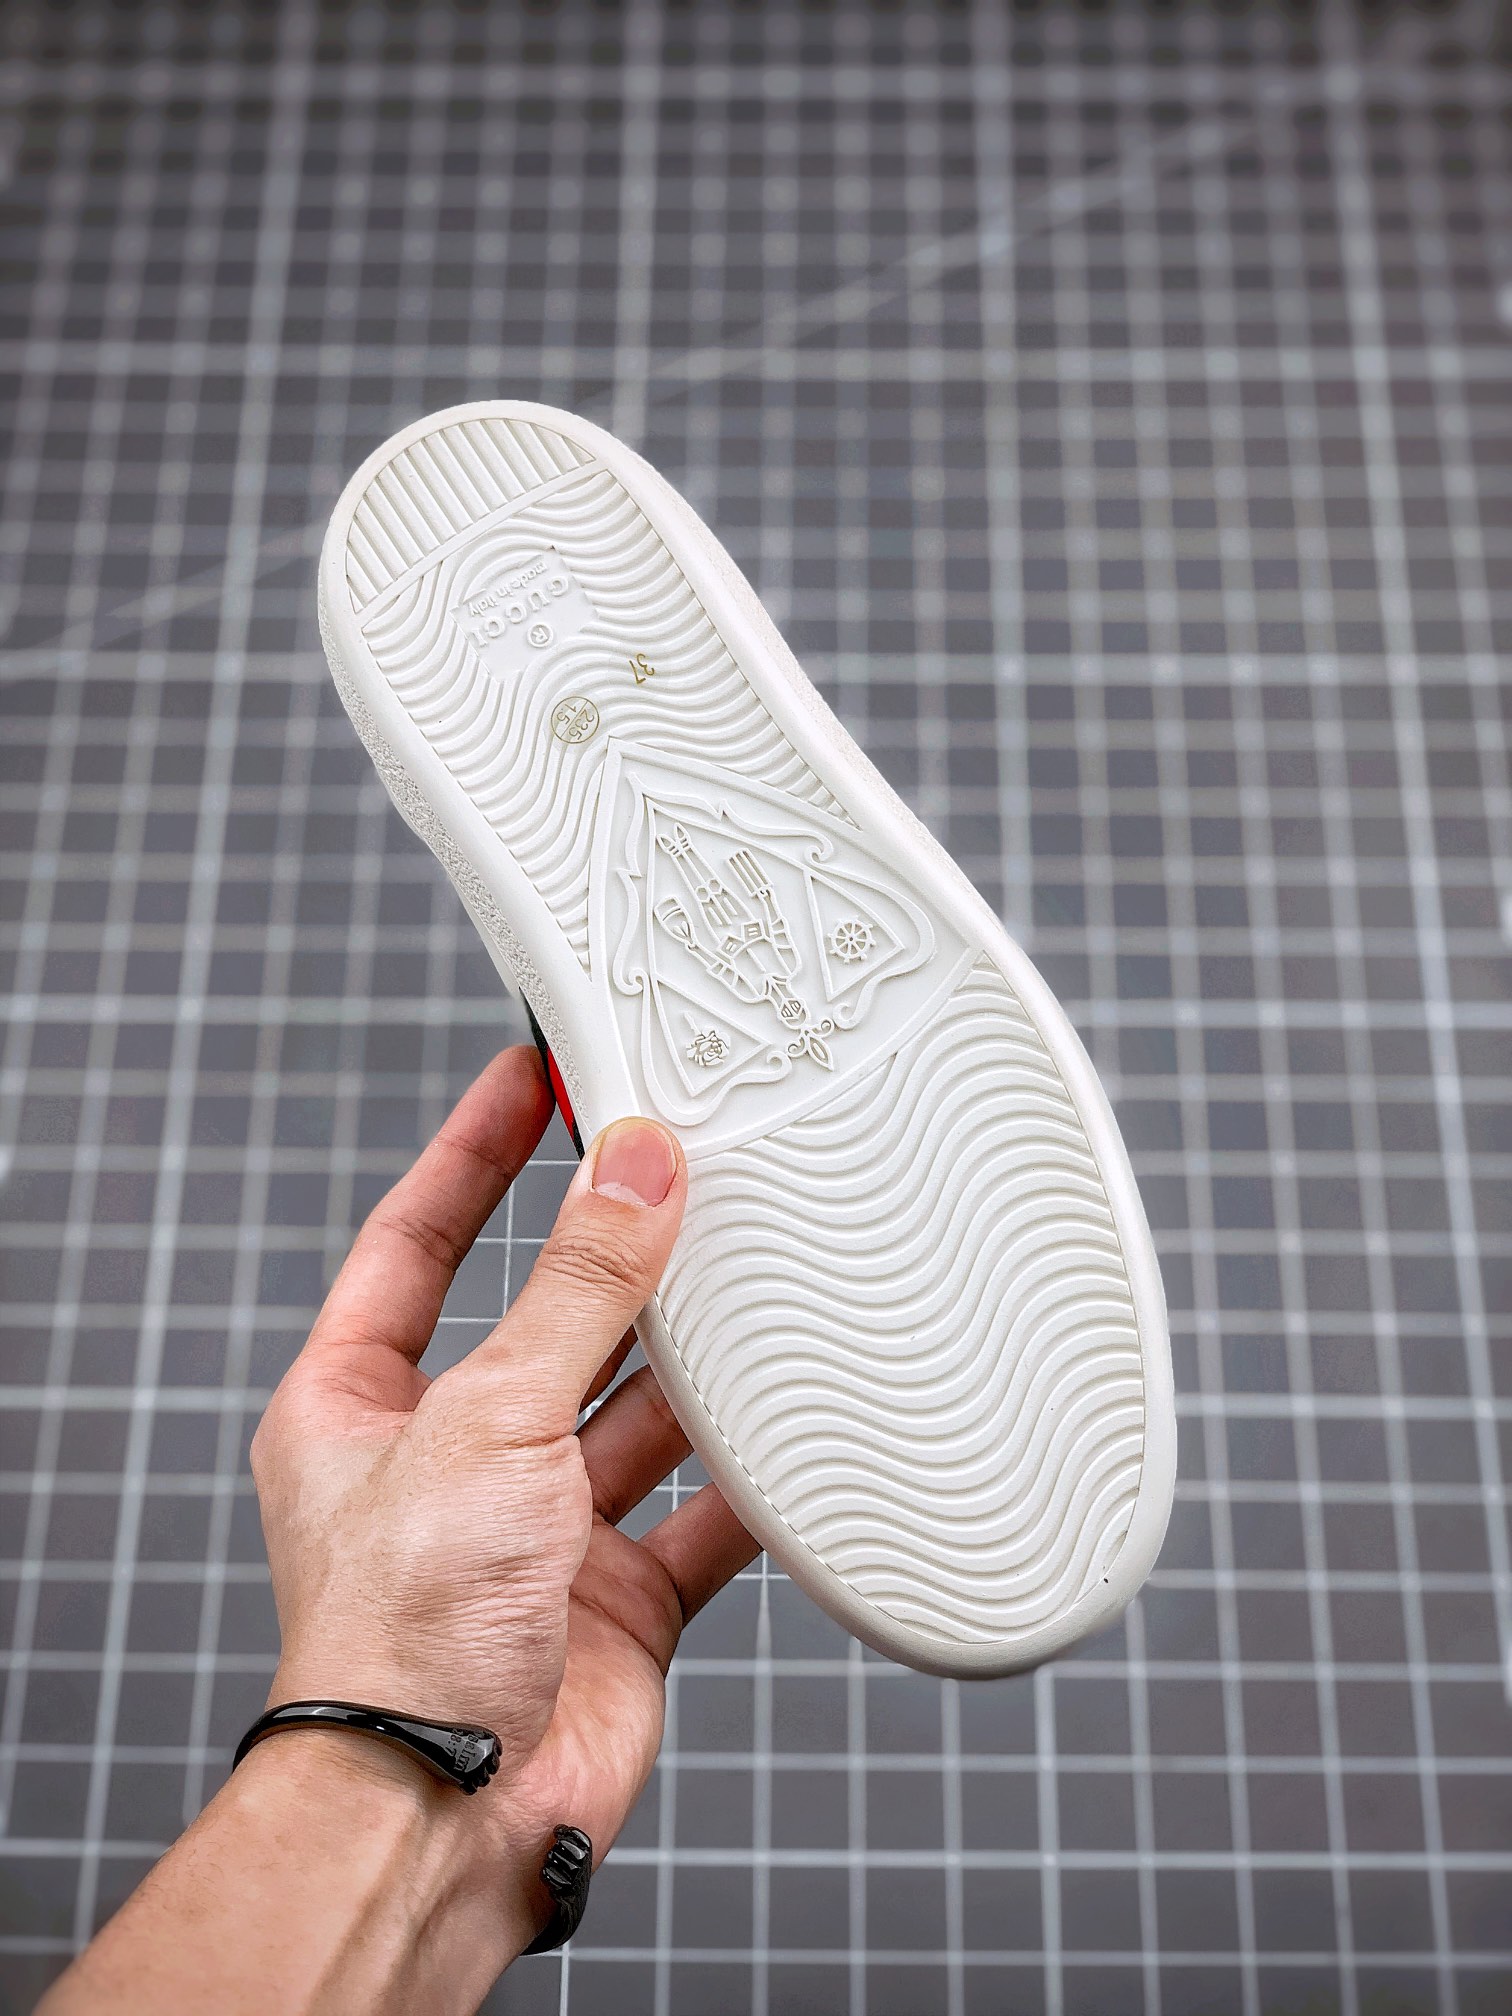 The most powerful and top-quality pure original purchase version chip on the market can scan the Gucci white shoe series classic Little Bee